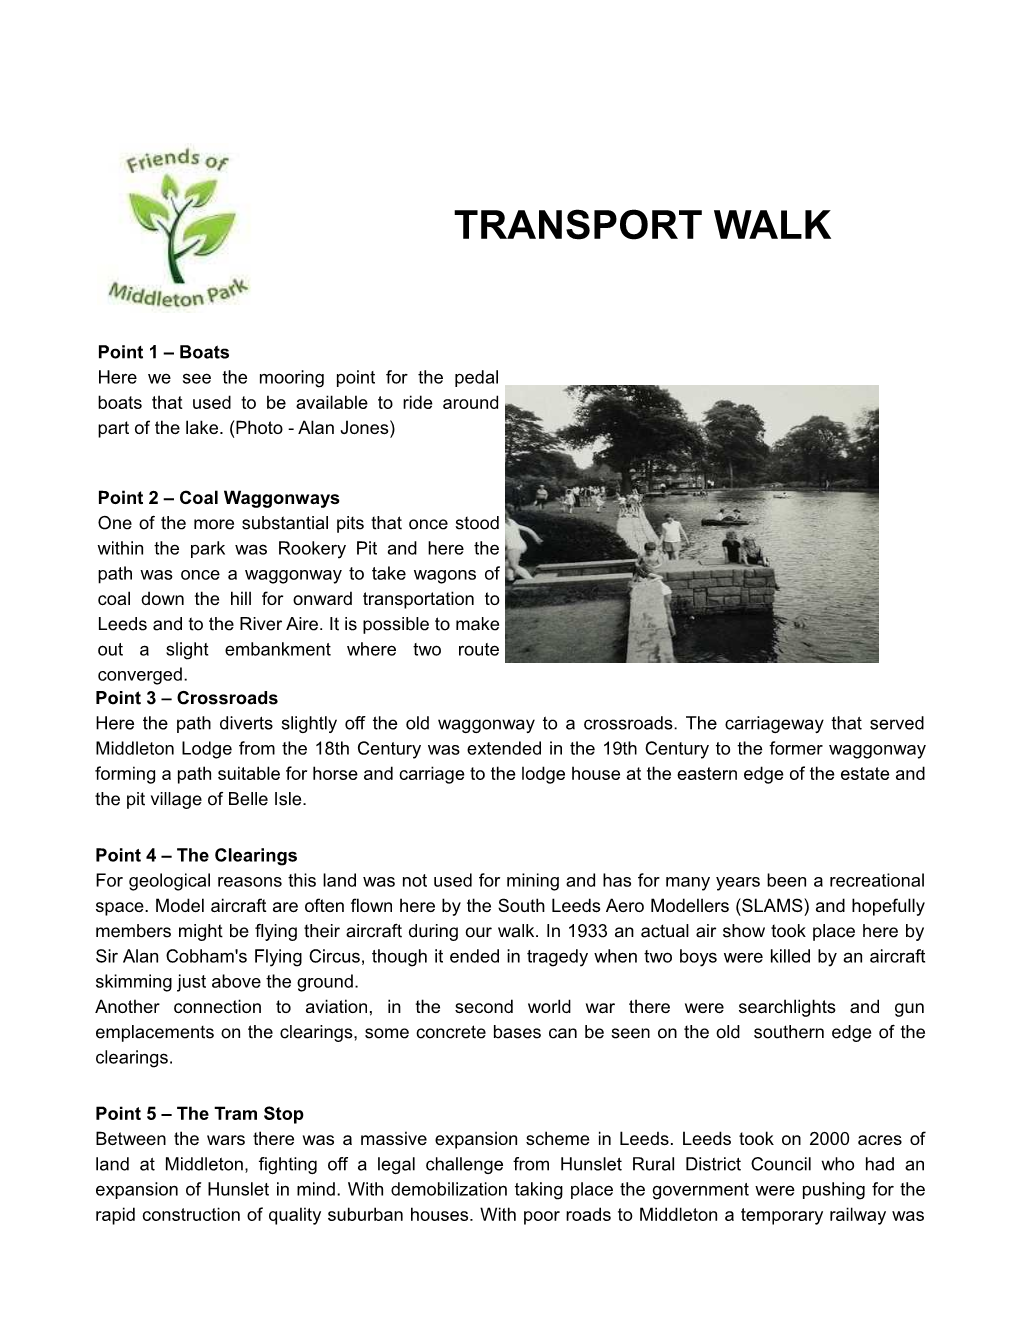 Kris's Transport Walk Notes and Map